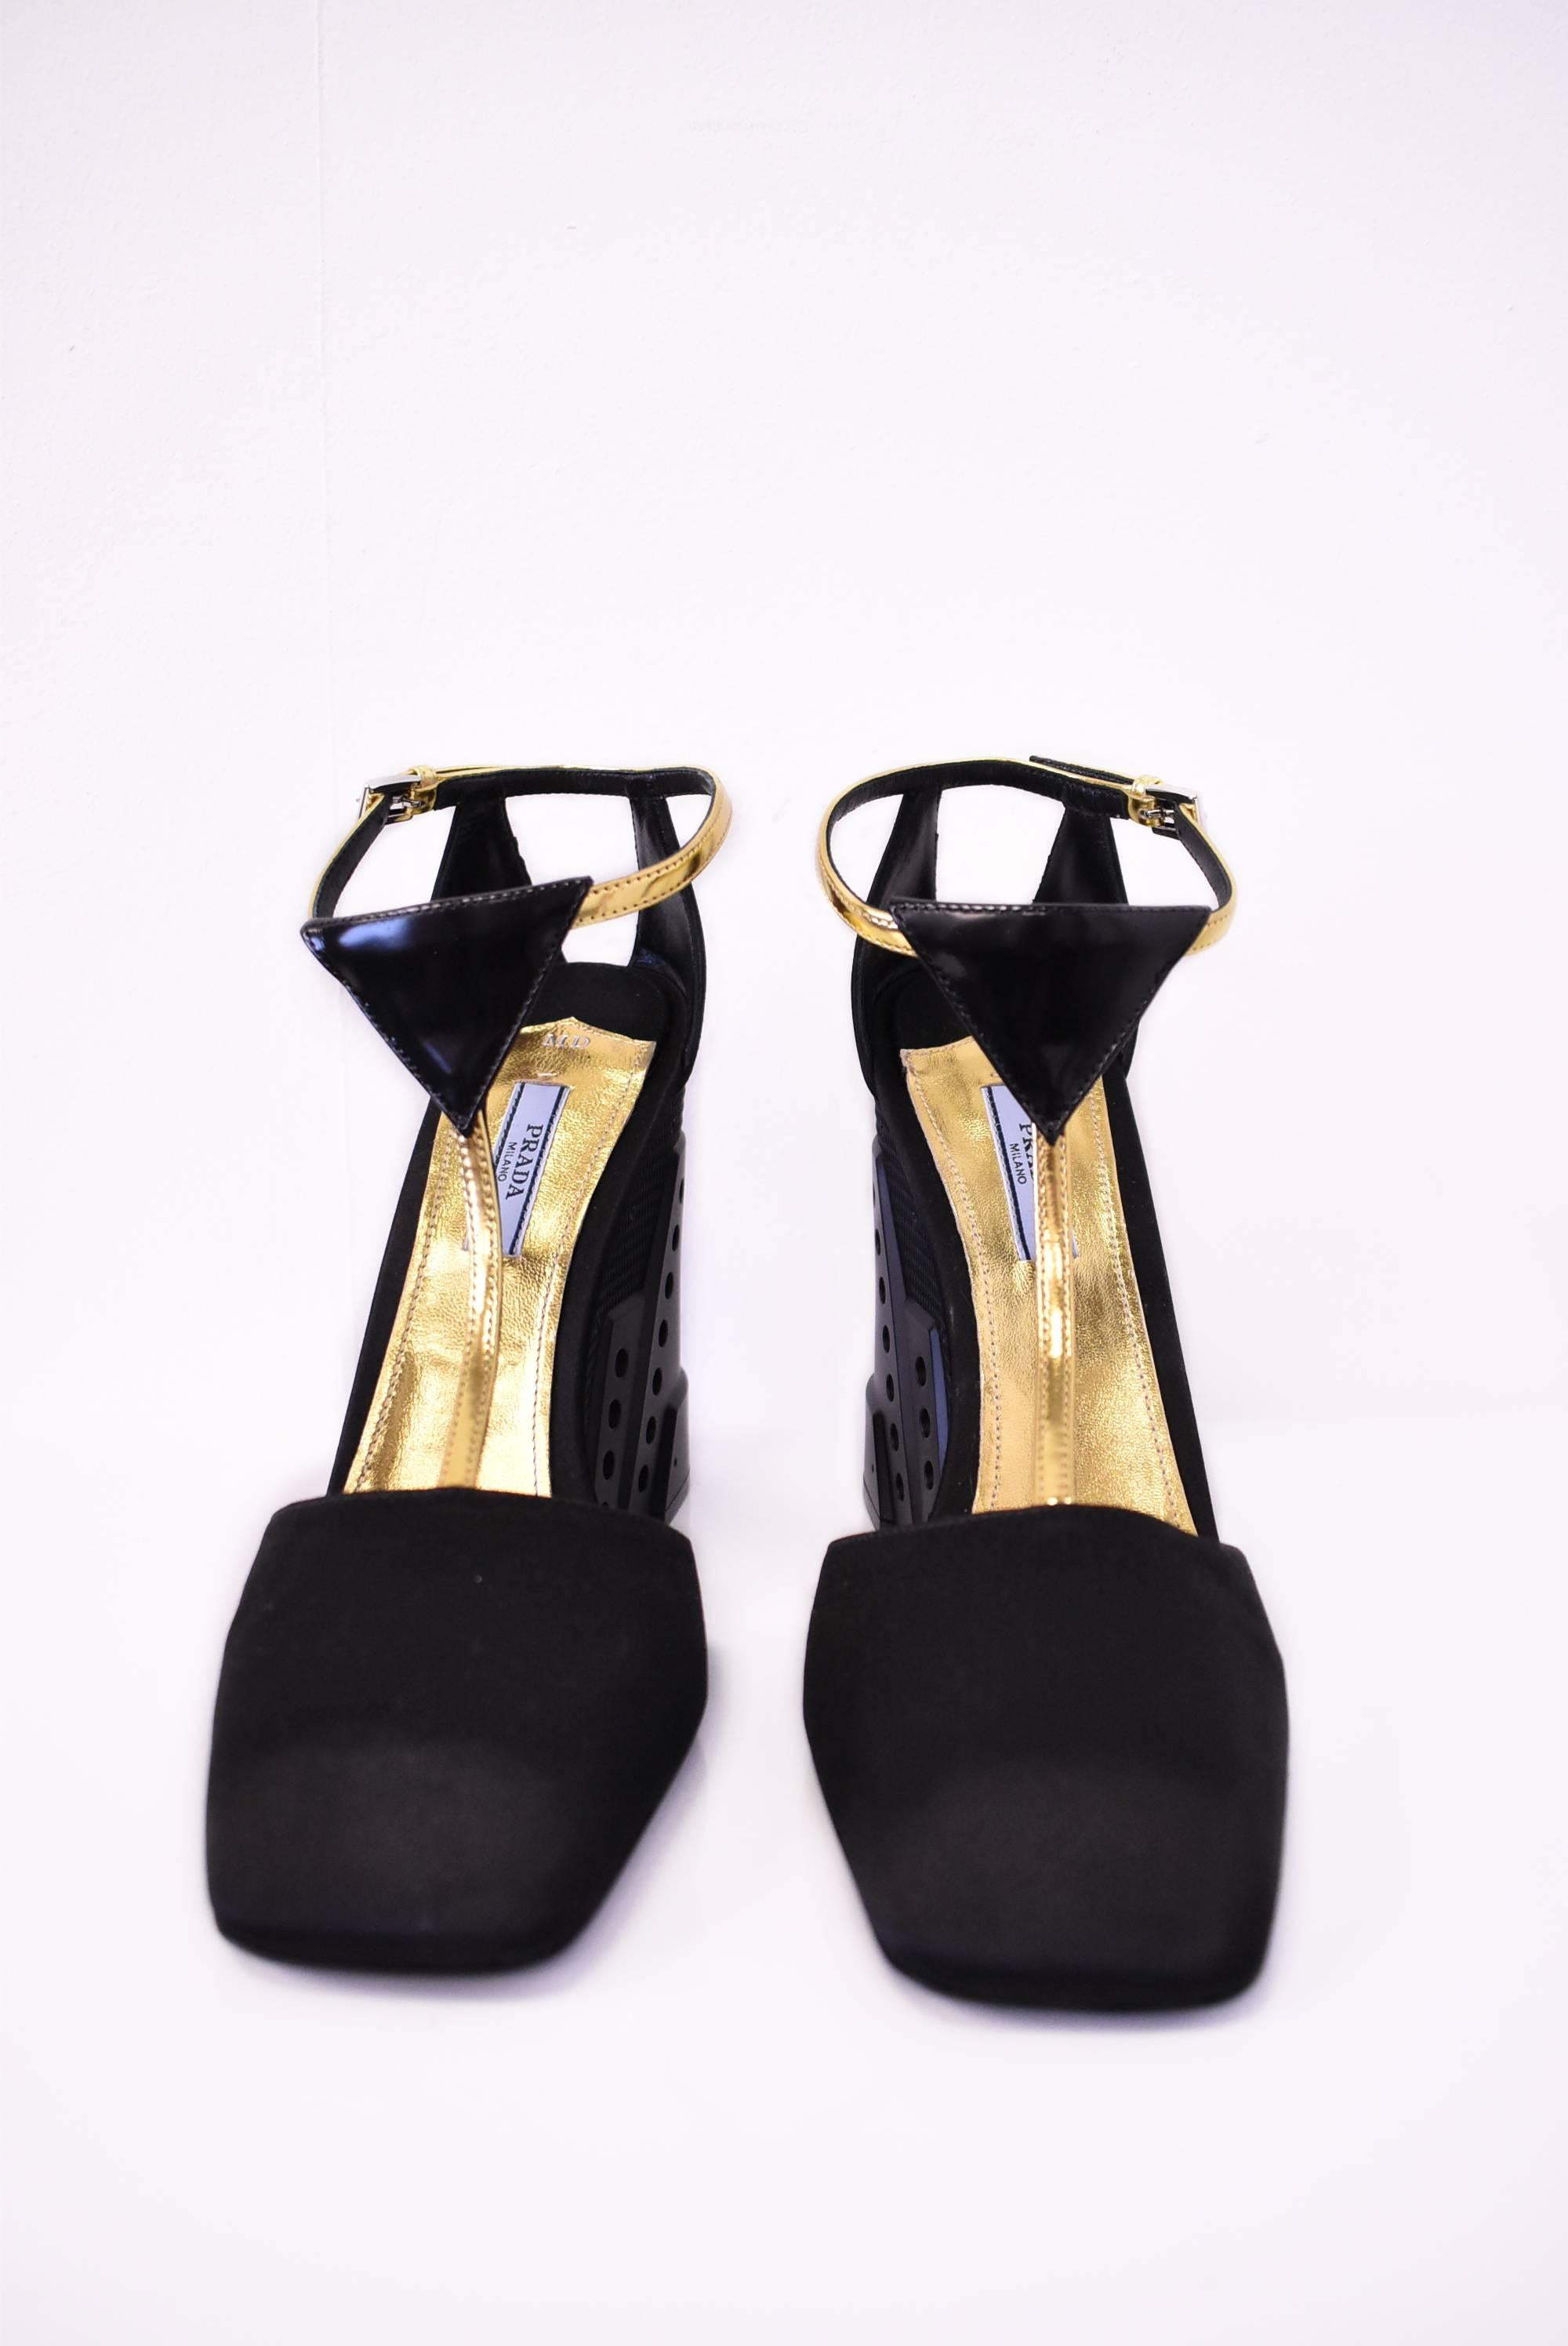 A pair of unworn and brand new black Prada wedge heels. The shoes are made from black silk satin with a closed square toe and gold T-strap ankle fastening. The wedge heel has a 5” height and a futuristic architectural, faux metal, perforated design.